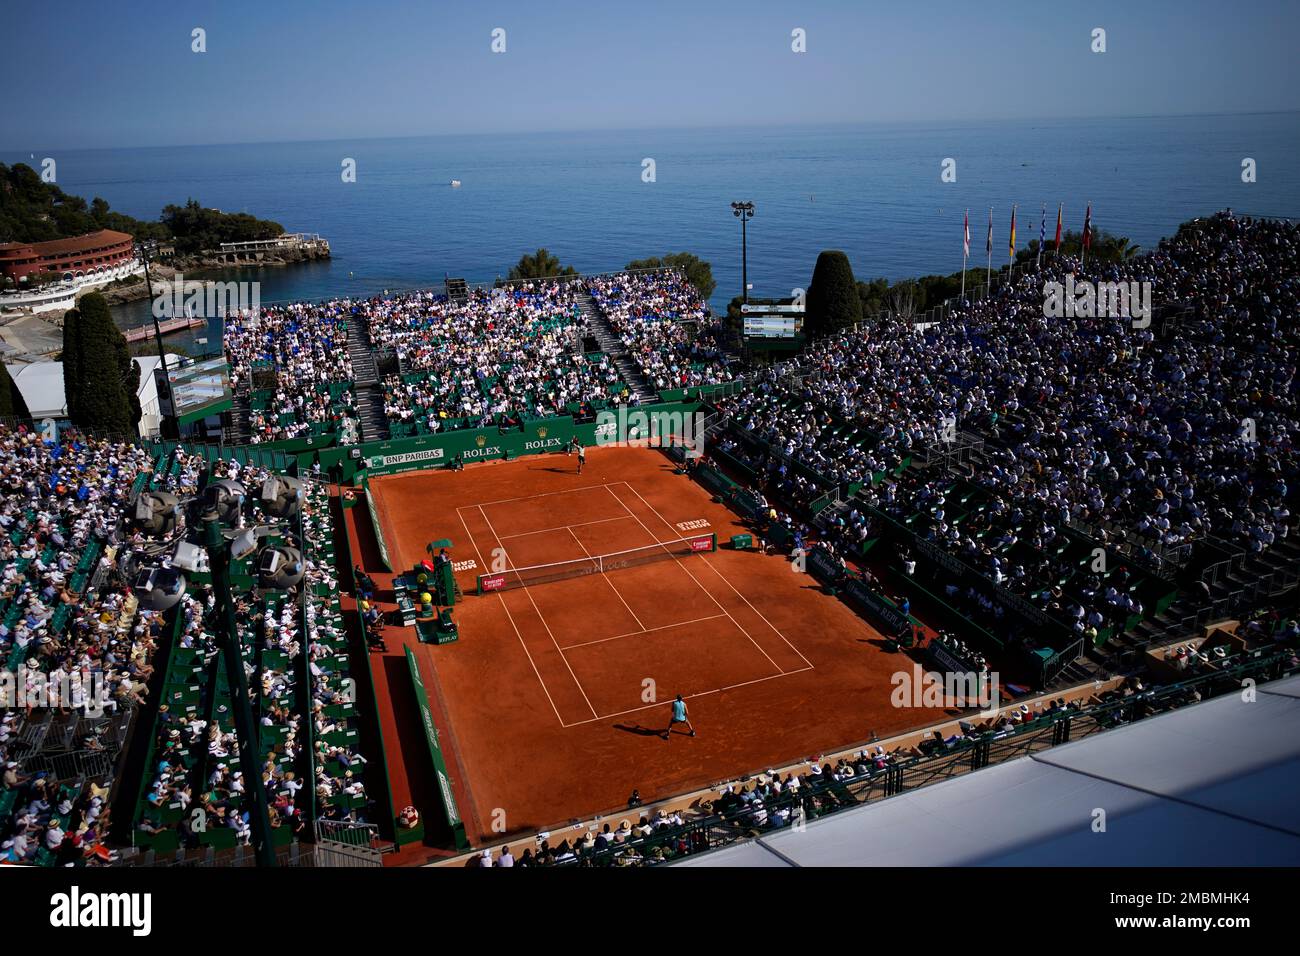 The crow watch Stefanos Tsitsipas of Greece, playing Alexander Zverev, of Germany, during their semifinal match of the Monte-Carlo Masters tennis tournament, Saturday, April 16, 2022 in Monaco